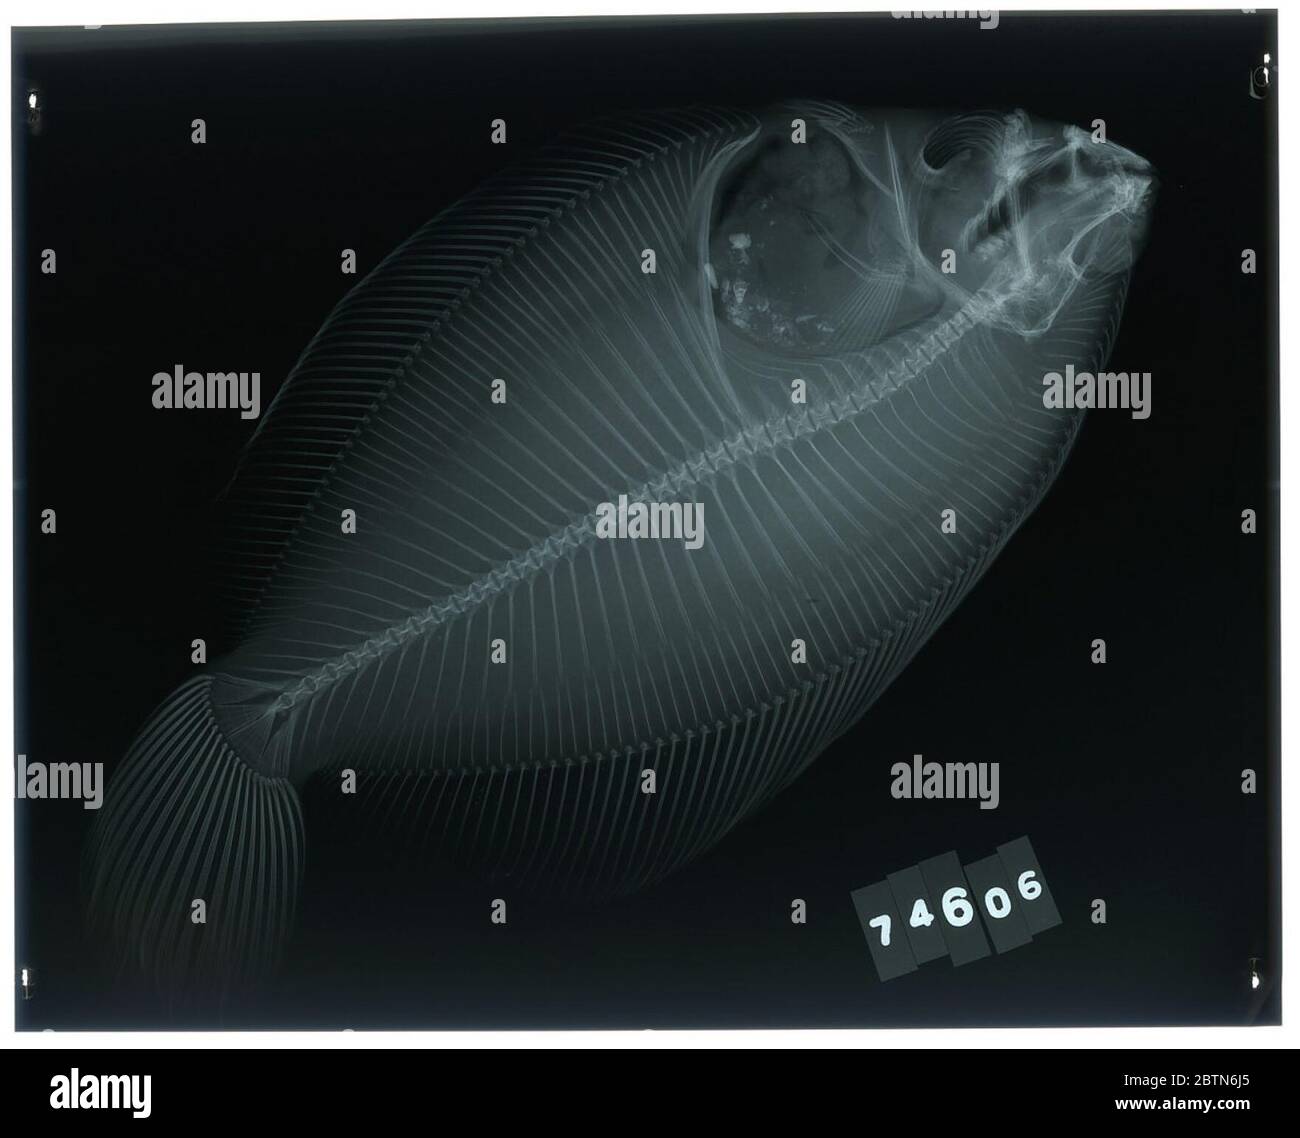 Pleuronichthys nephelus. Radiograph is of a type; The Smithsonian NMNH Division of Fishes uses the convention of maintaining the original species name for type specimens designated at the time of description. The currently accepted name for this species is Pleuronichthys coenosus.25 Oct 20181 Stock Photo